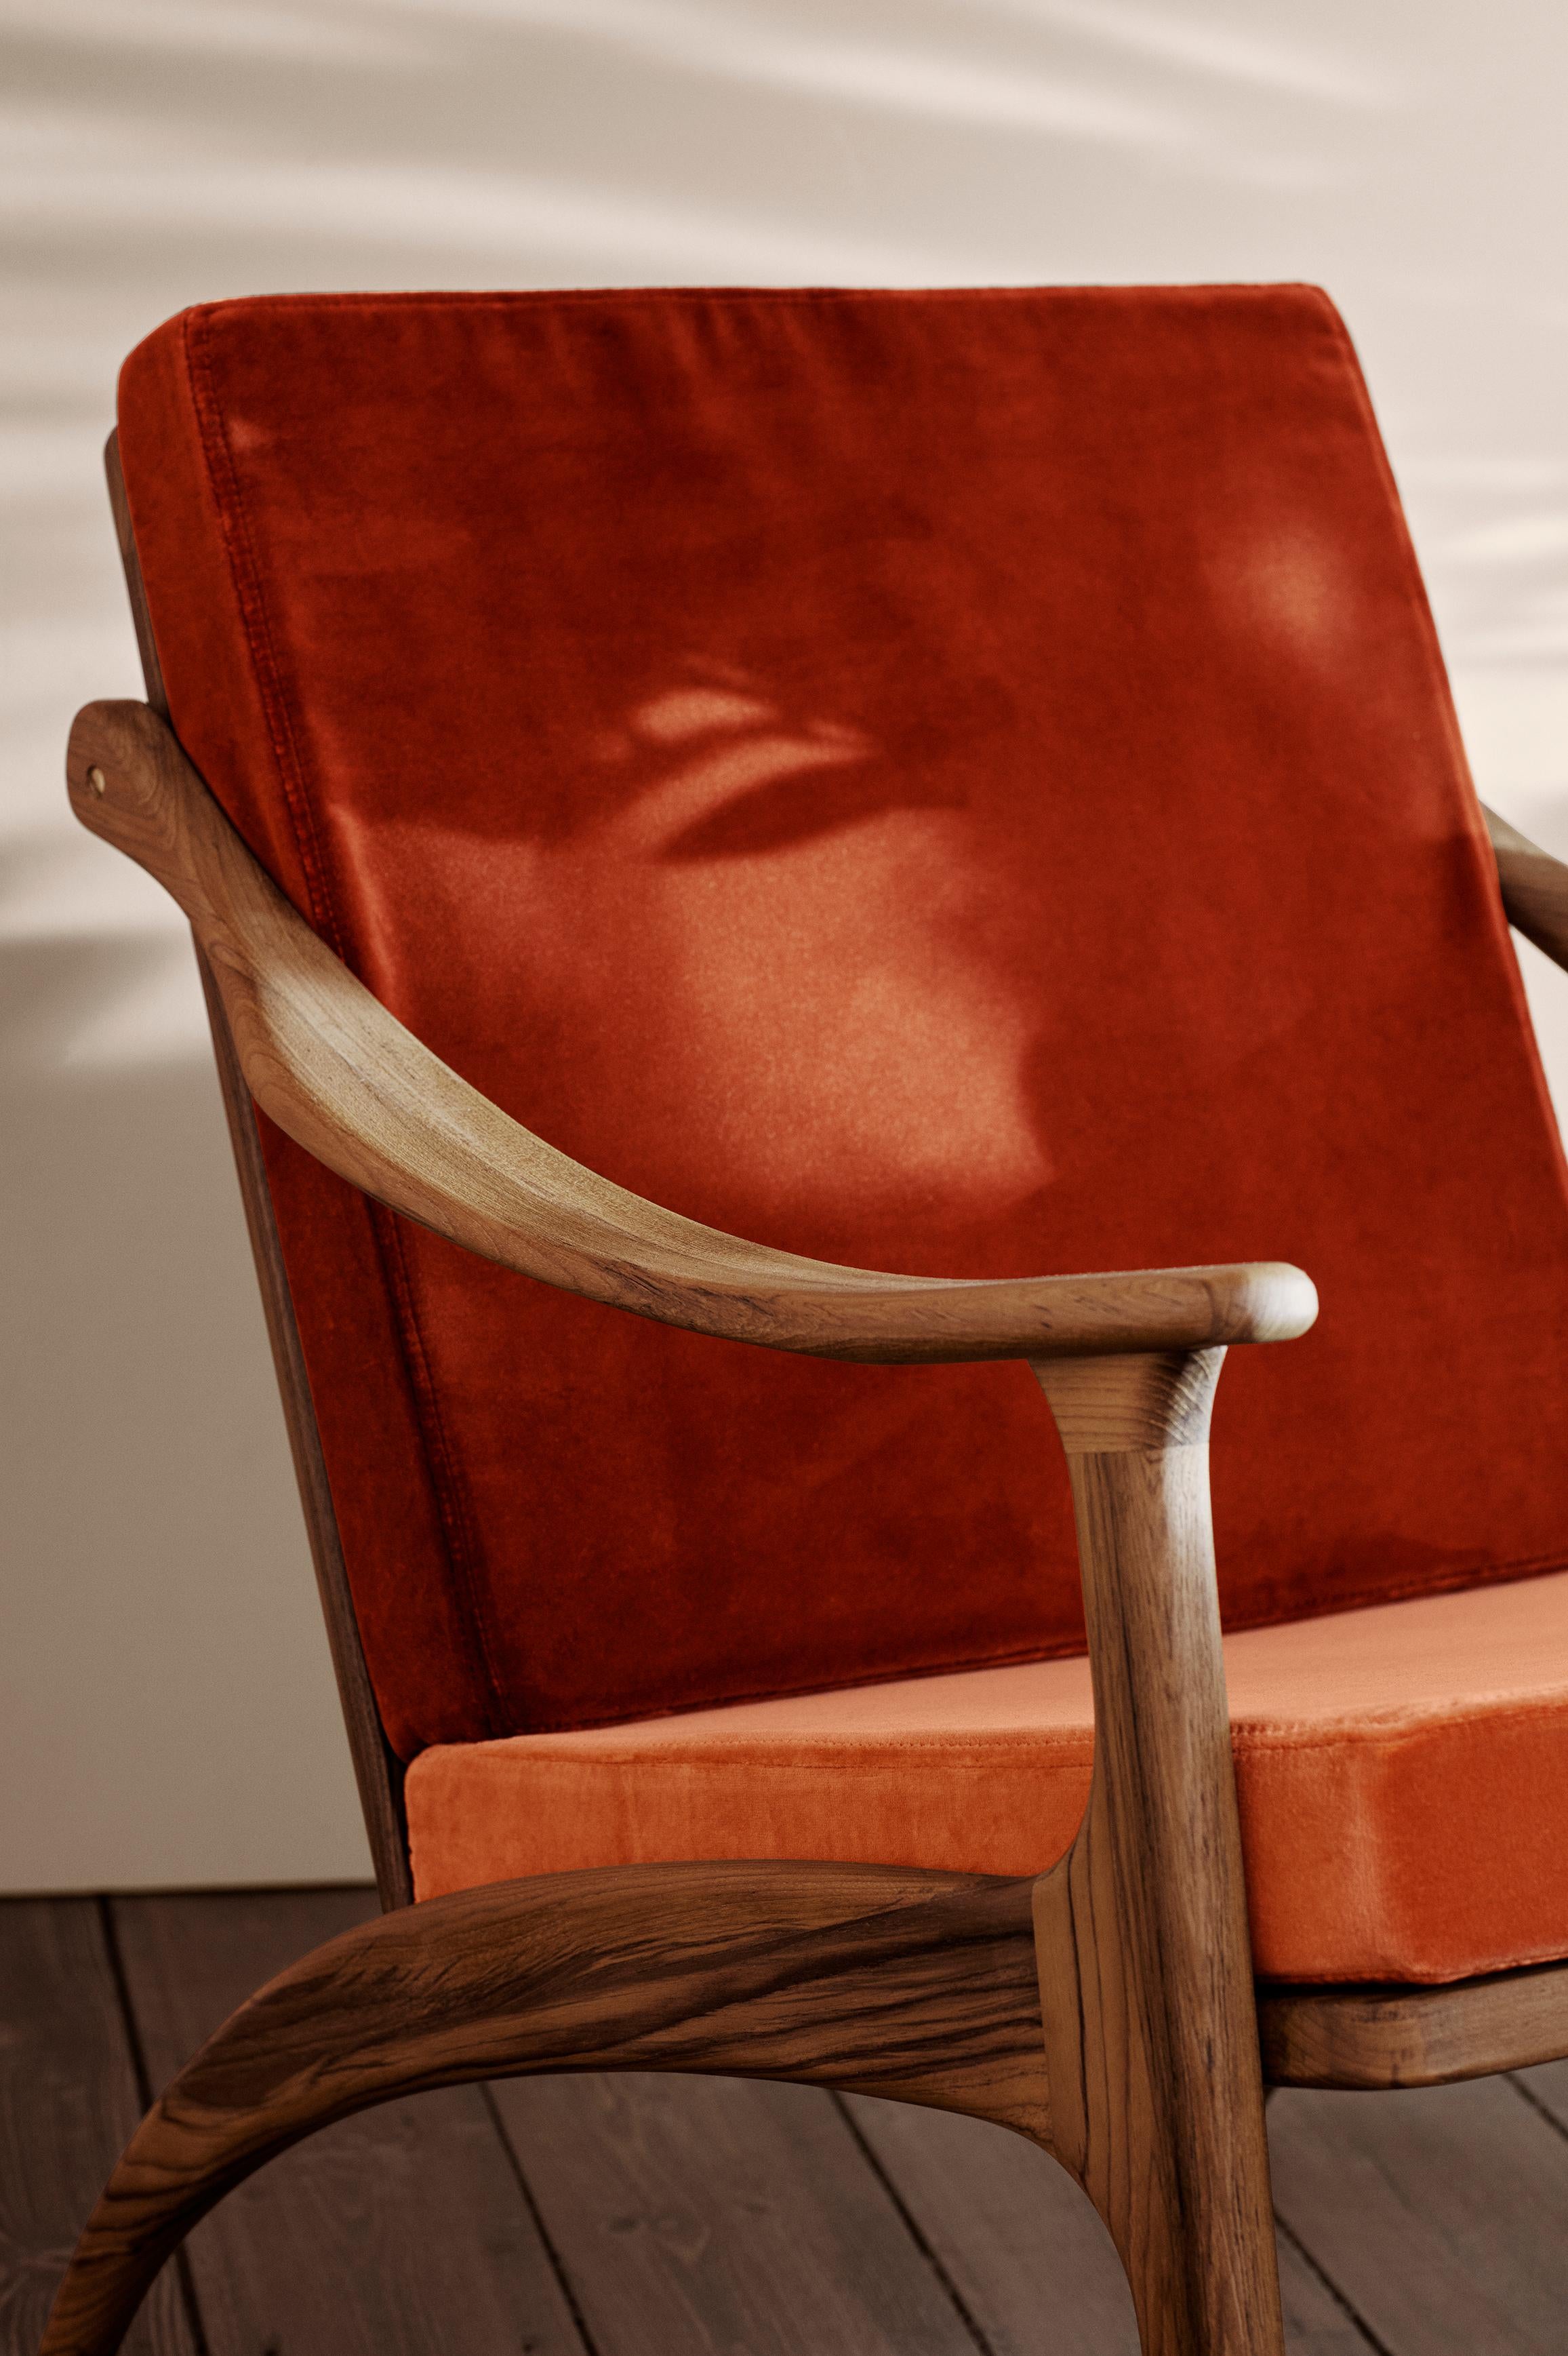 Lean Back Lounge Two-Tone Chair in Teak, by Arne Hovmand-Olsen from Warm Nordic For Sale 3